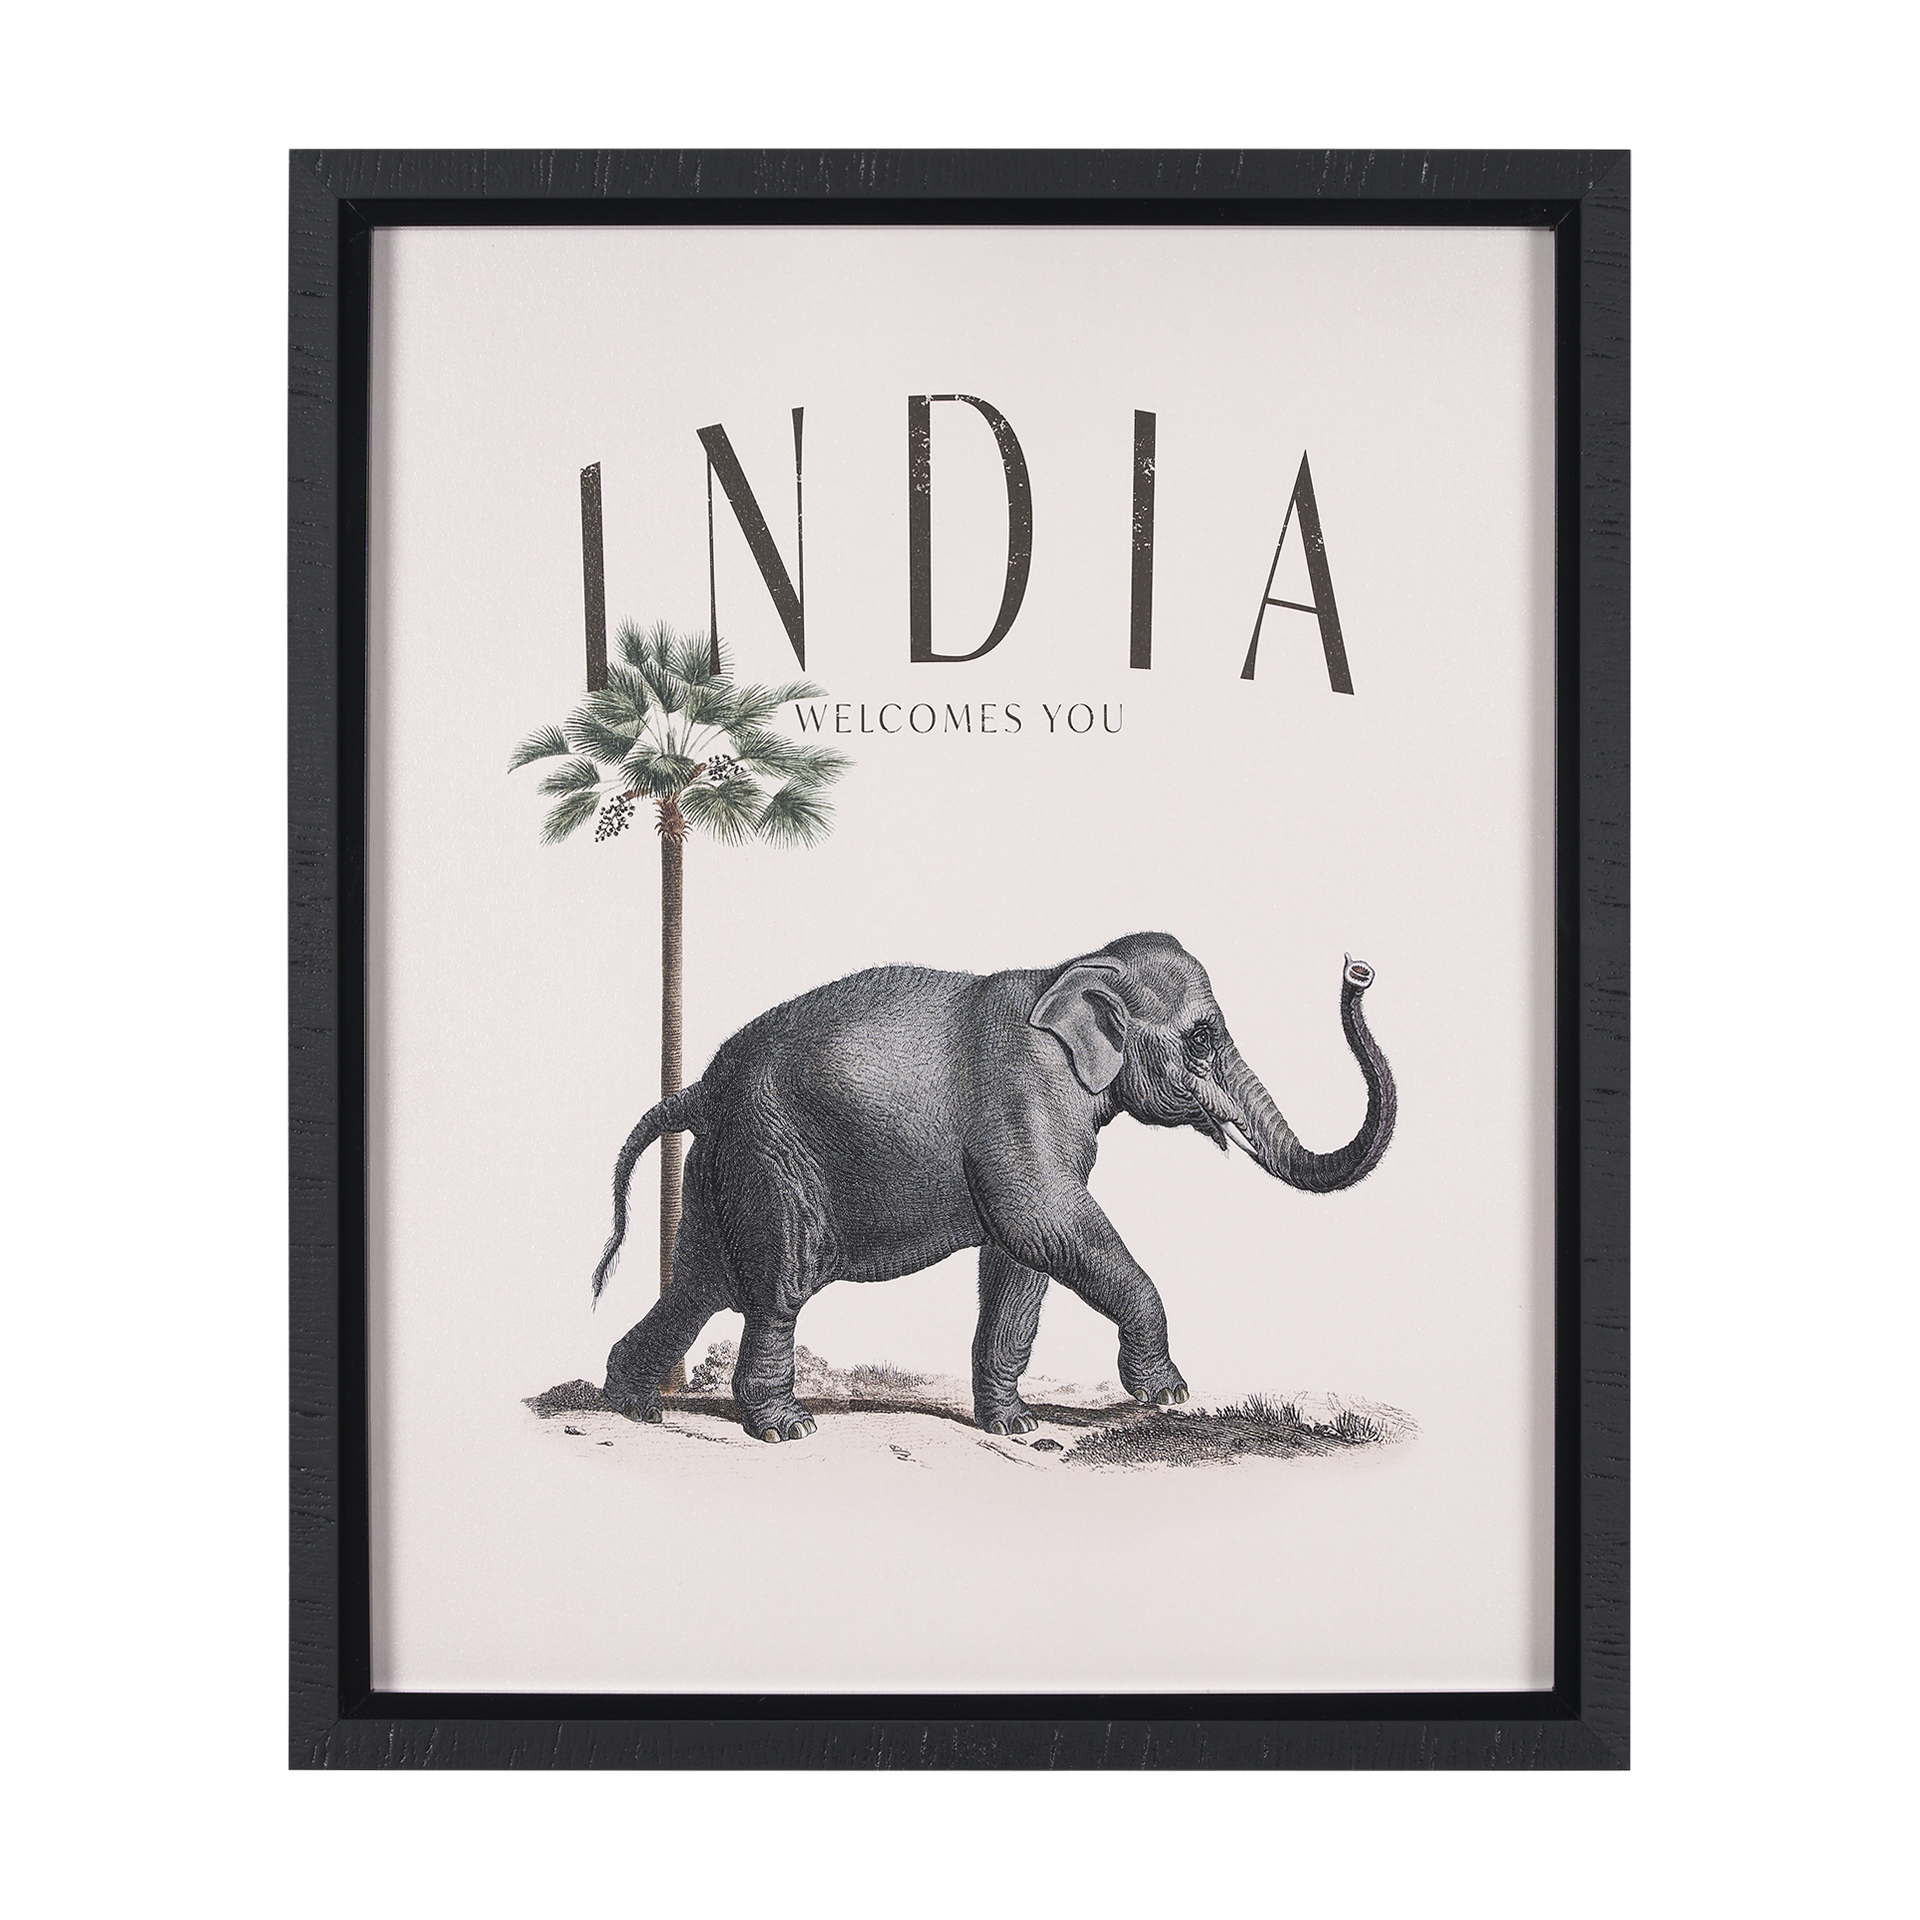 Travel Guide - India (26 x 32)